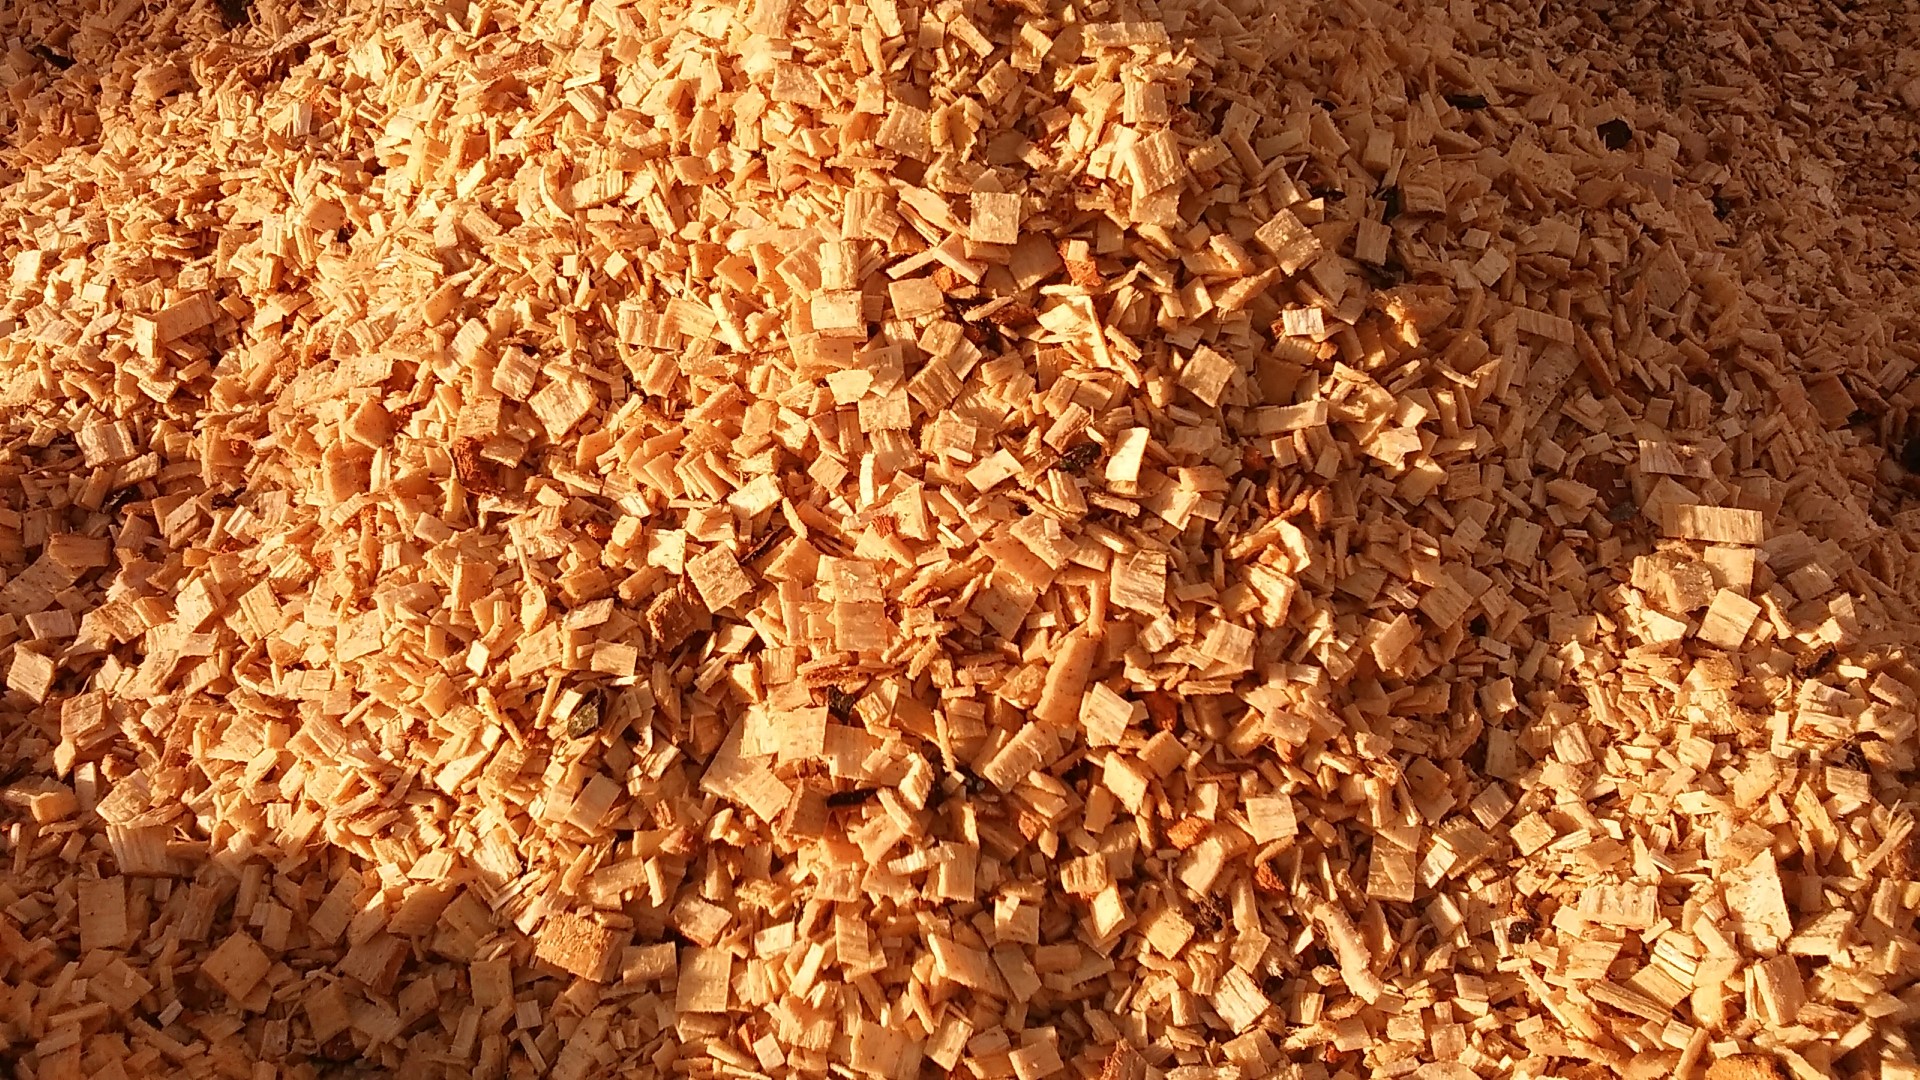 PC Stål ApS are setting new stardards on the market for wood chips